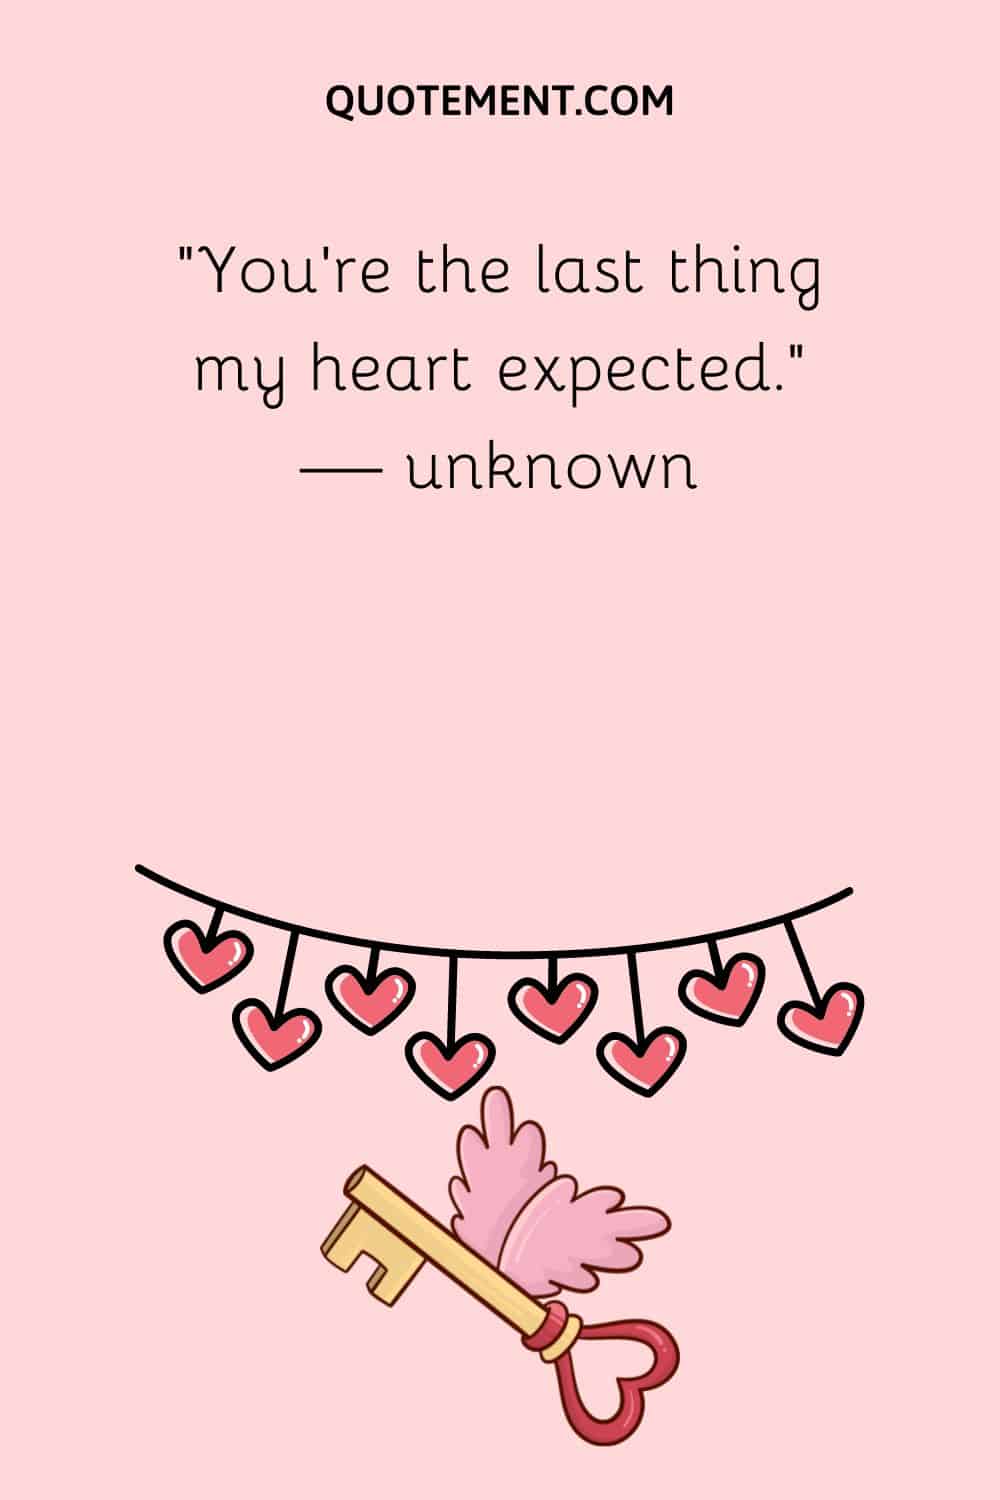 “You’re the last thing my heart expected.” — unknown